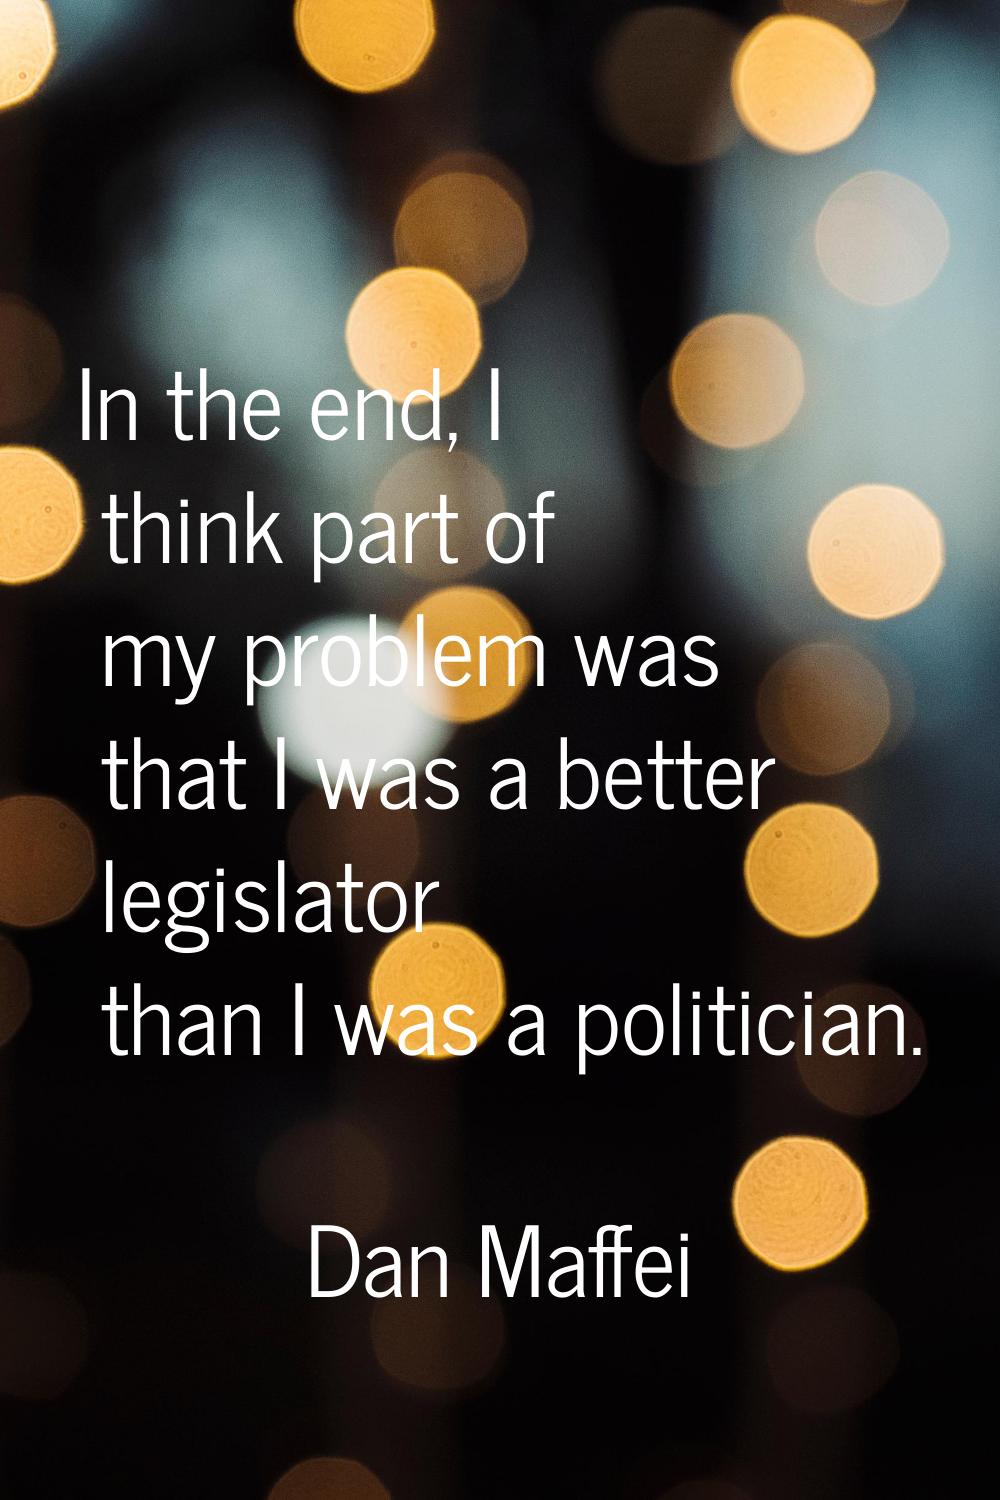 In the end, I think part of my problem was that I was a better legislator than I was a politician.